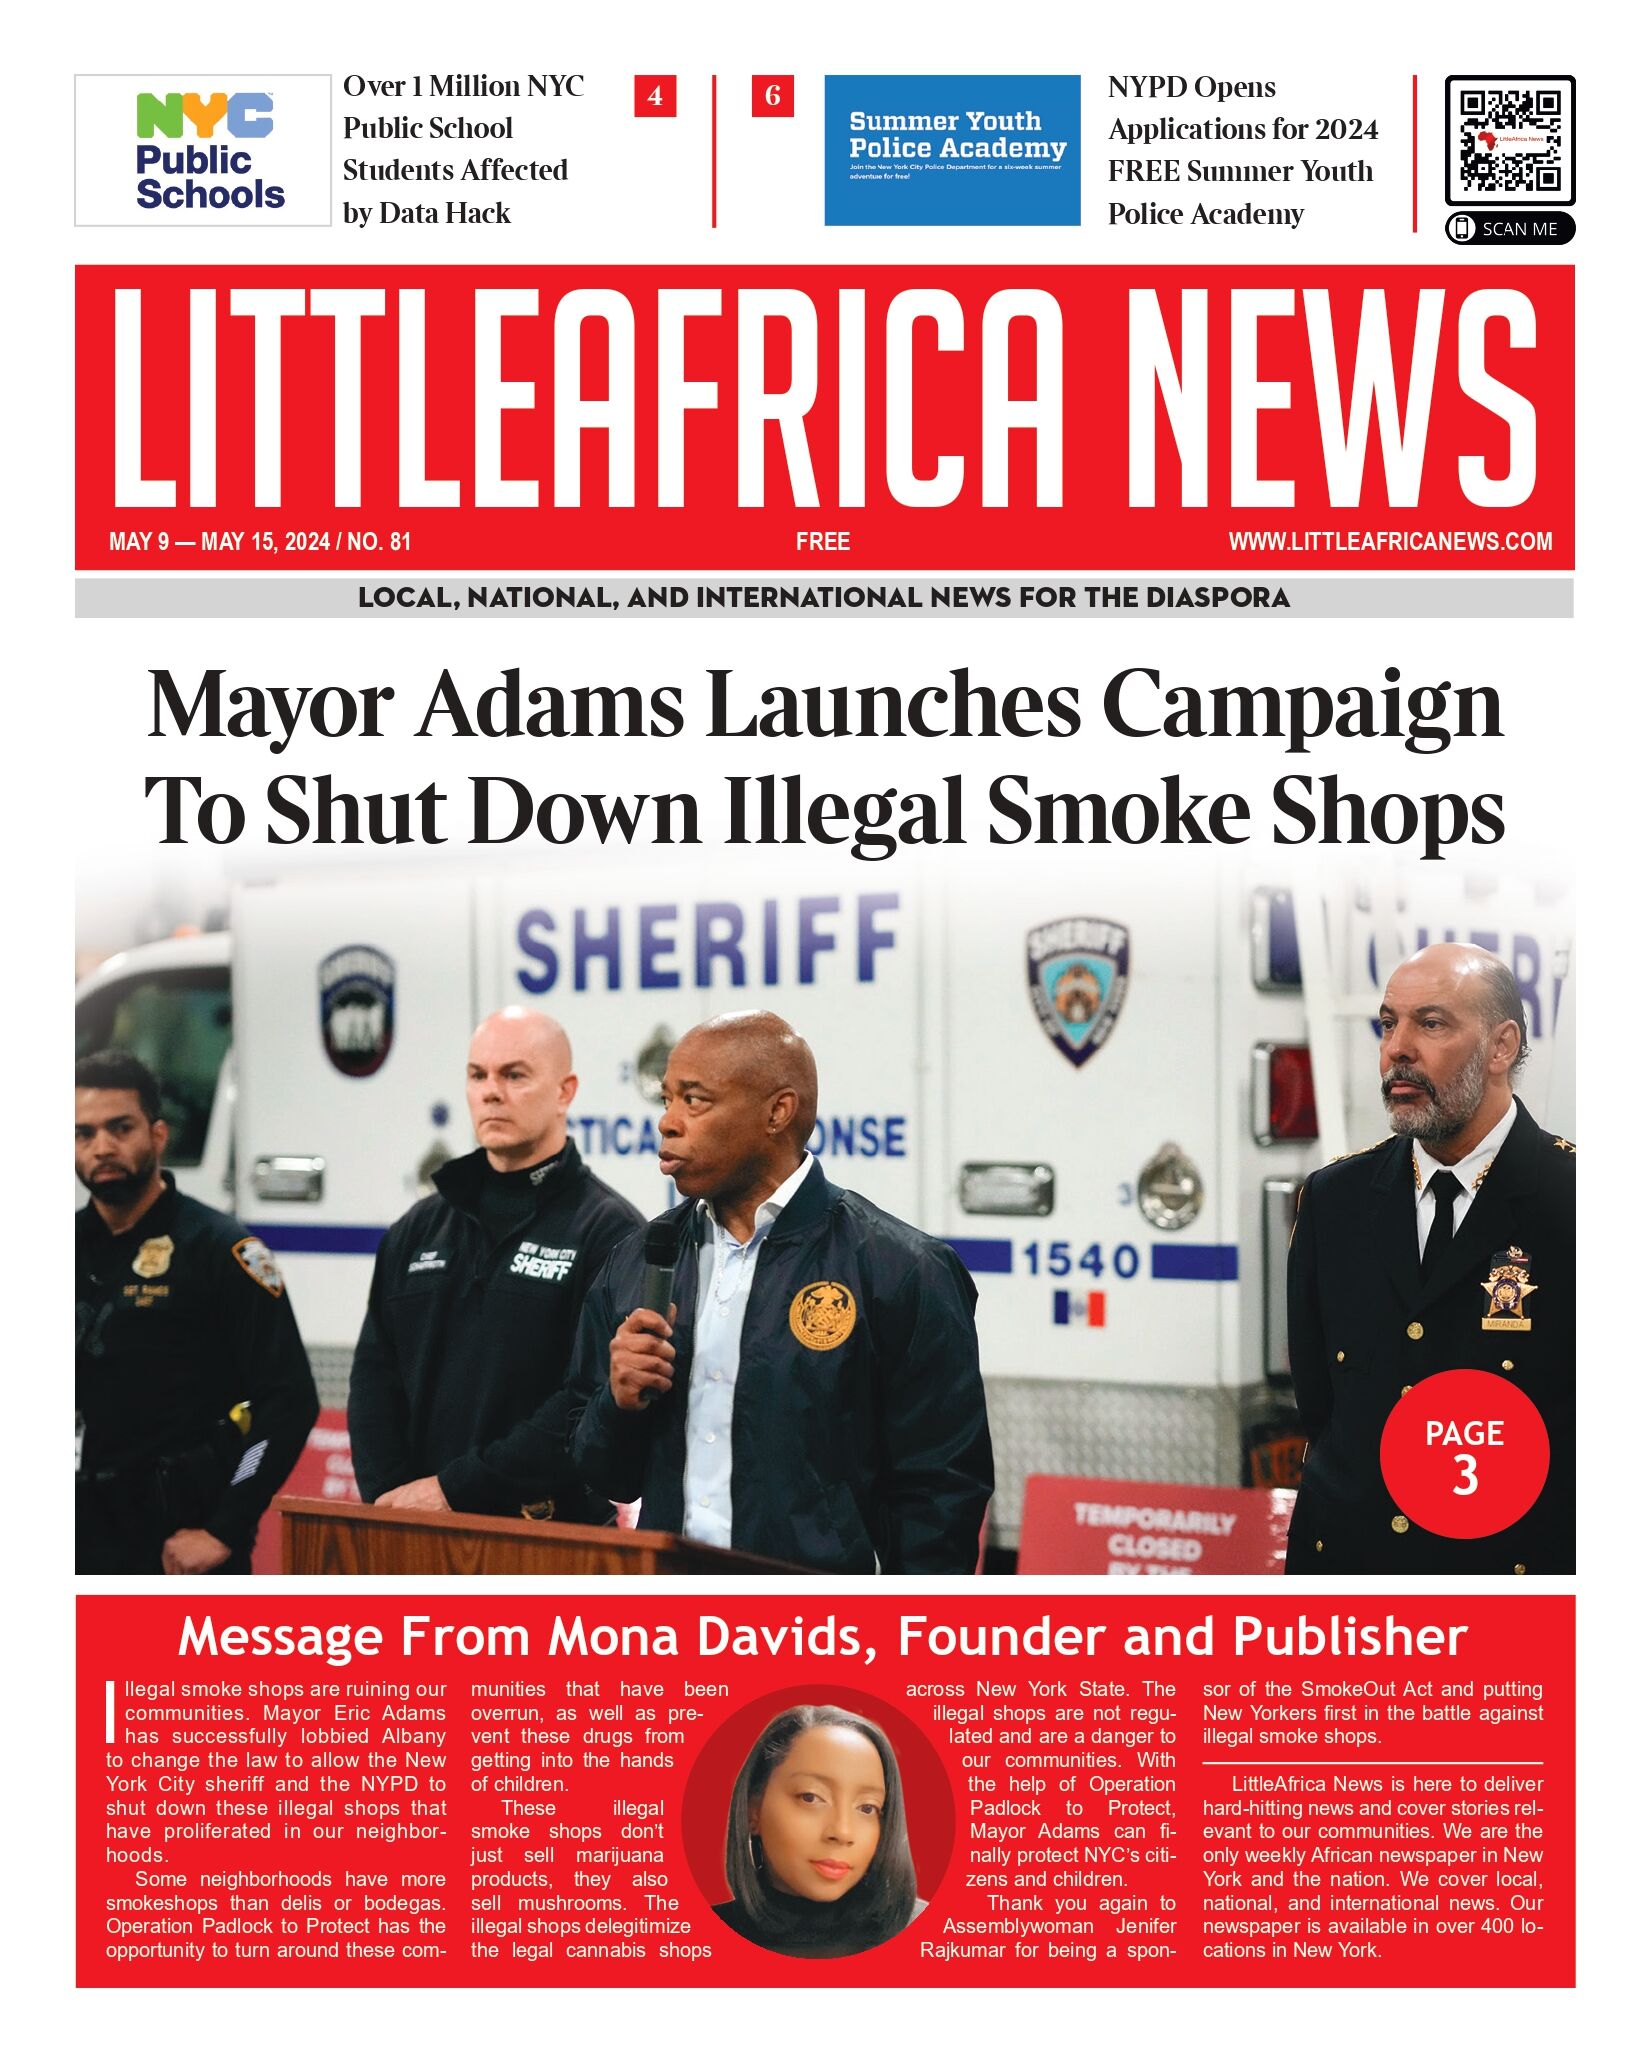 LittleAfrica News Newspaper: May 9-May 15, 2024